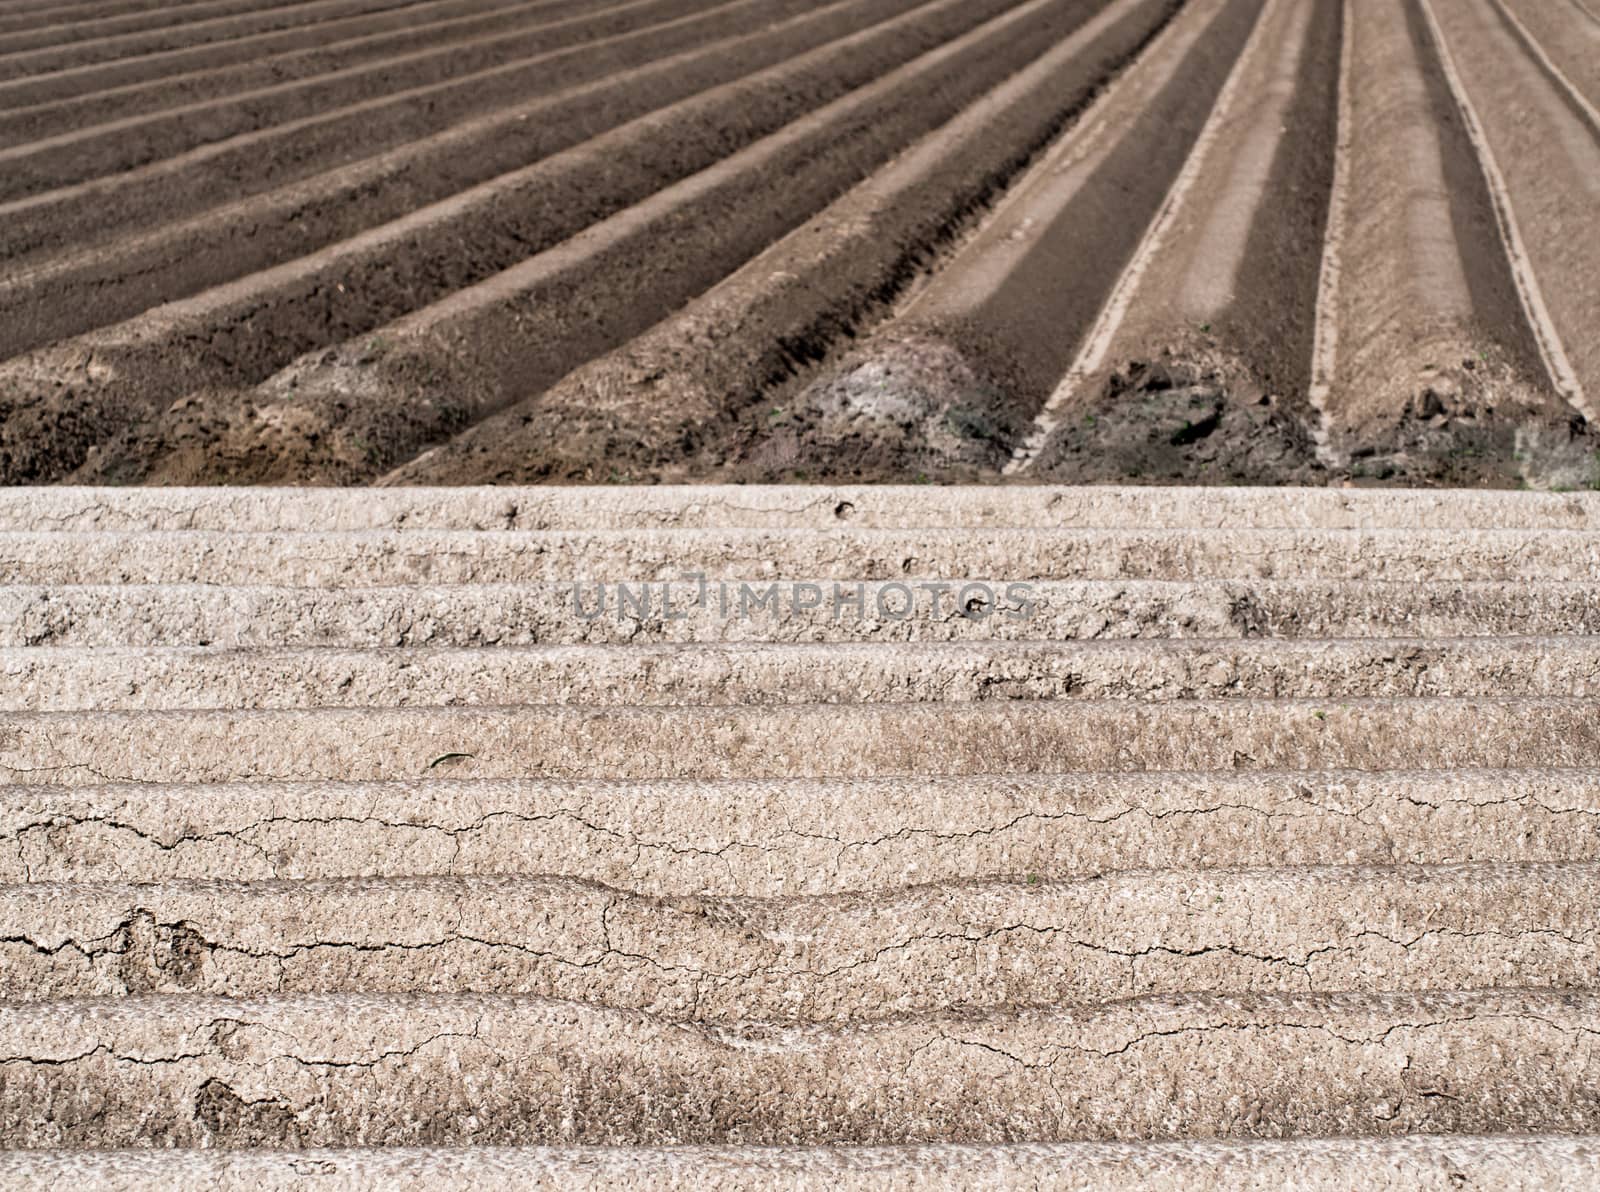 Structures of a potato field